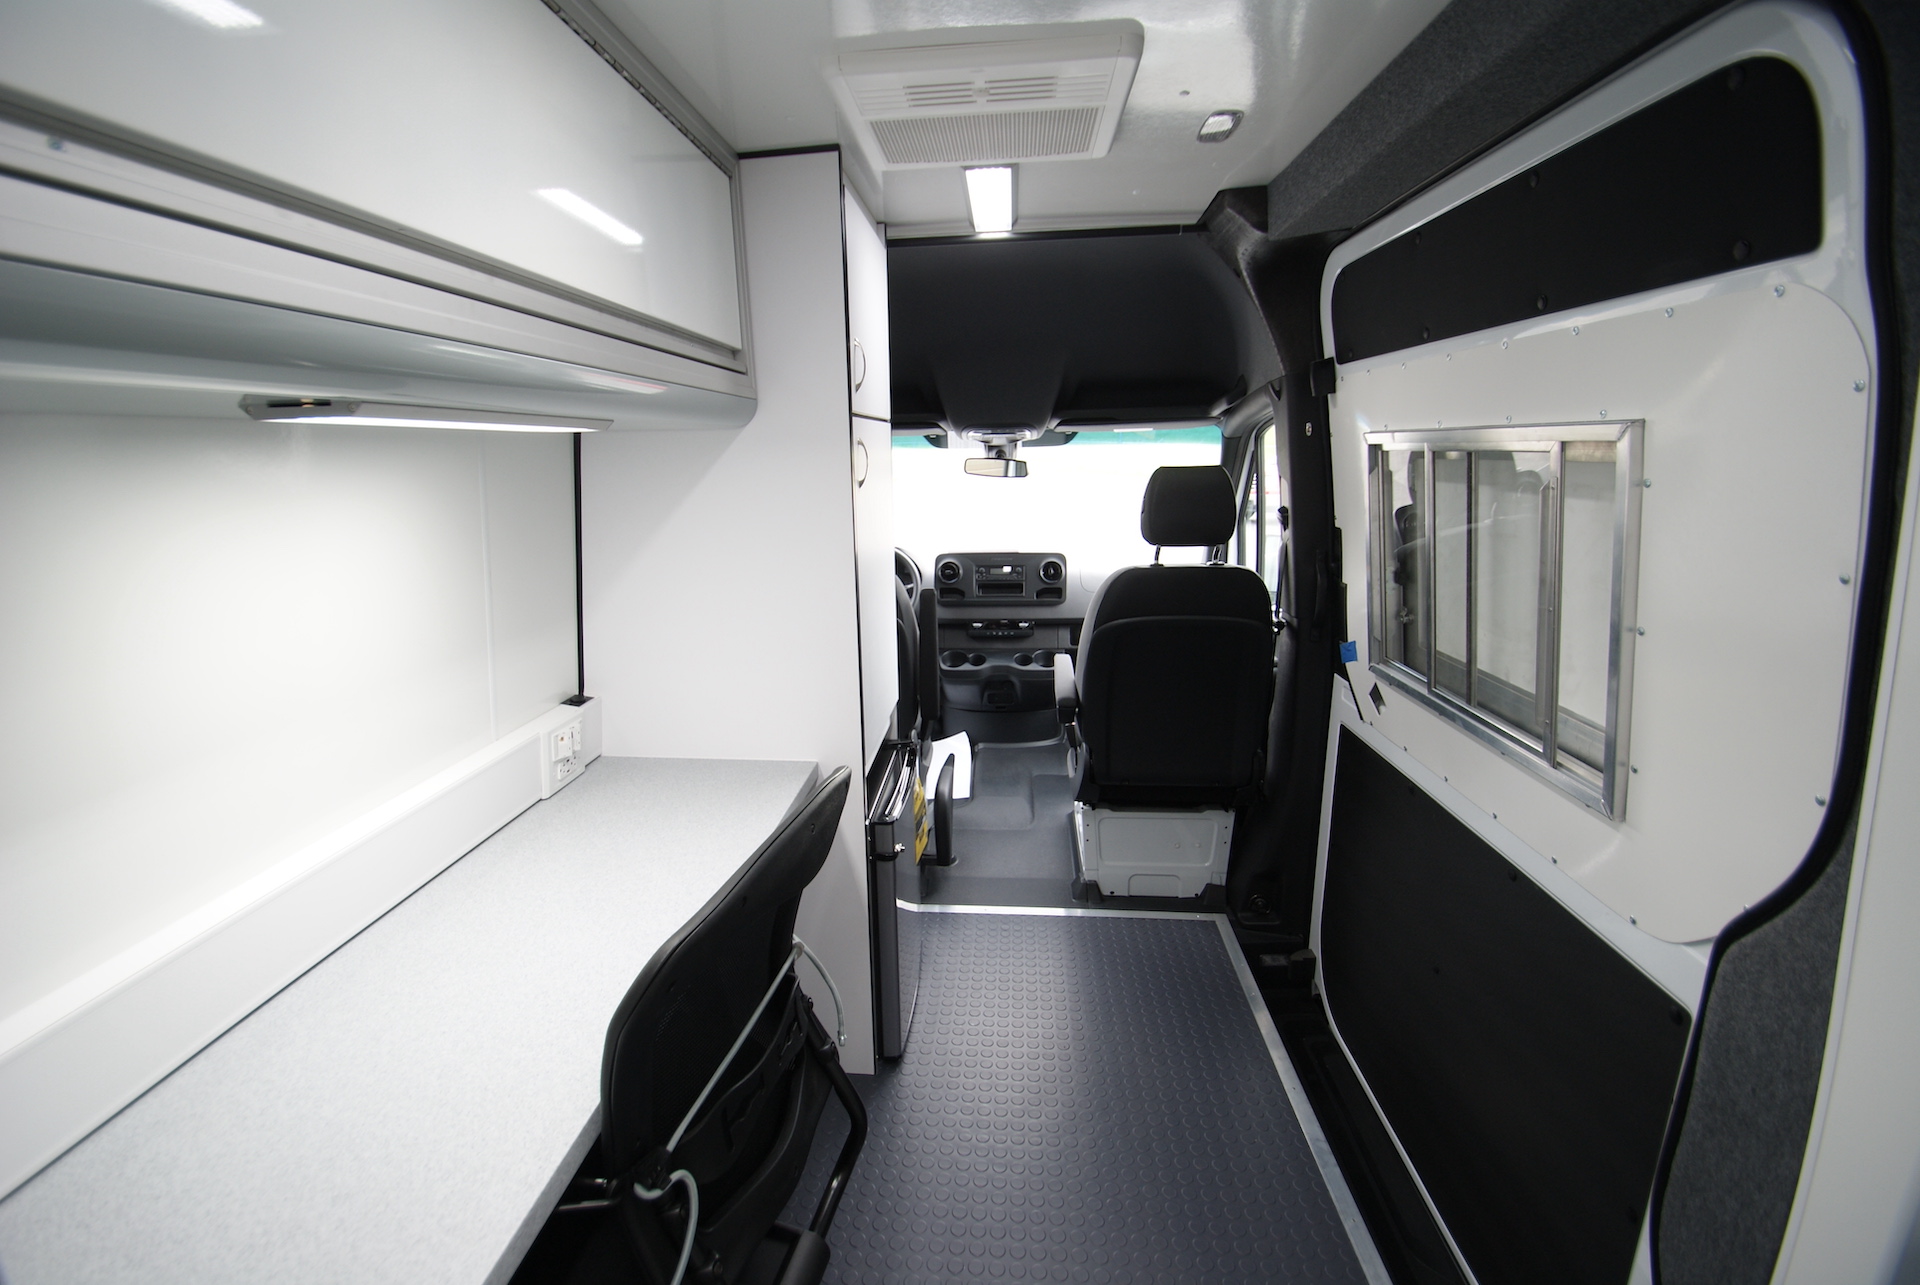 A back-to-front view inside a unit for Huntingdon, WV.